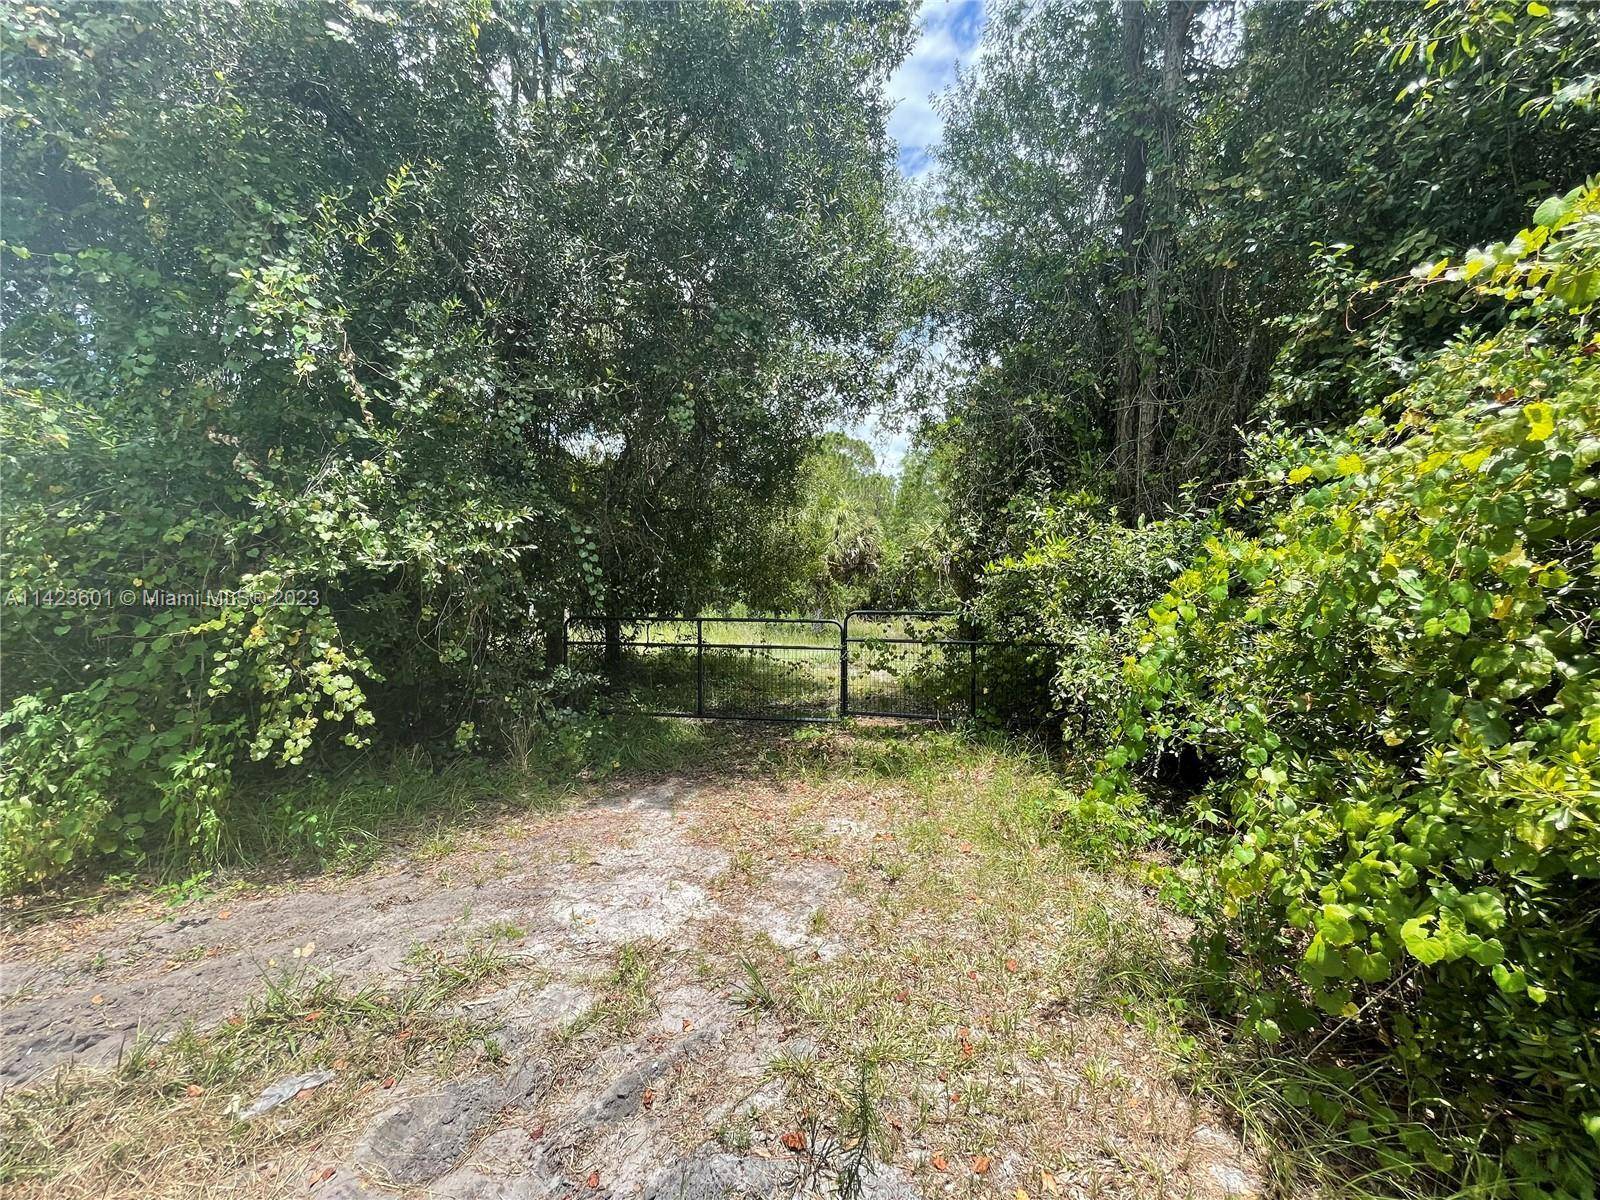 5 ACRE Lot, partially fenced.